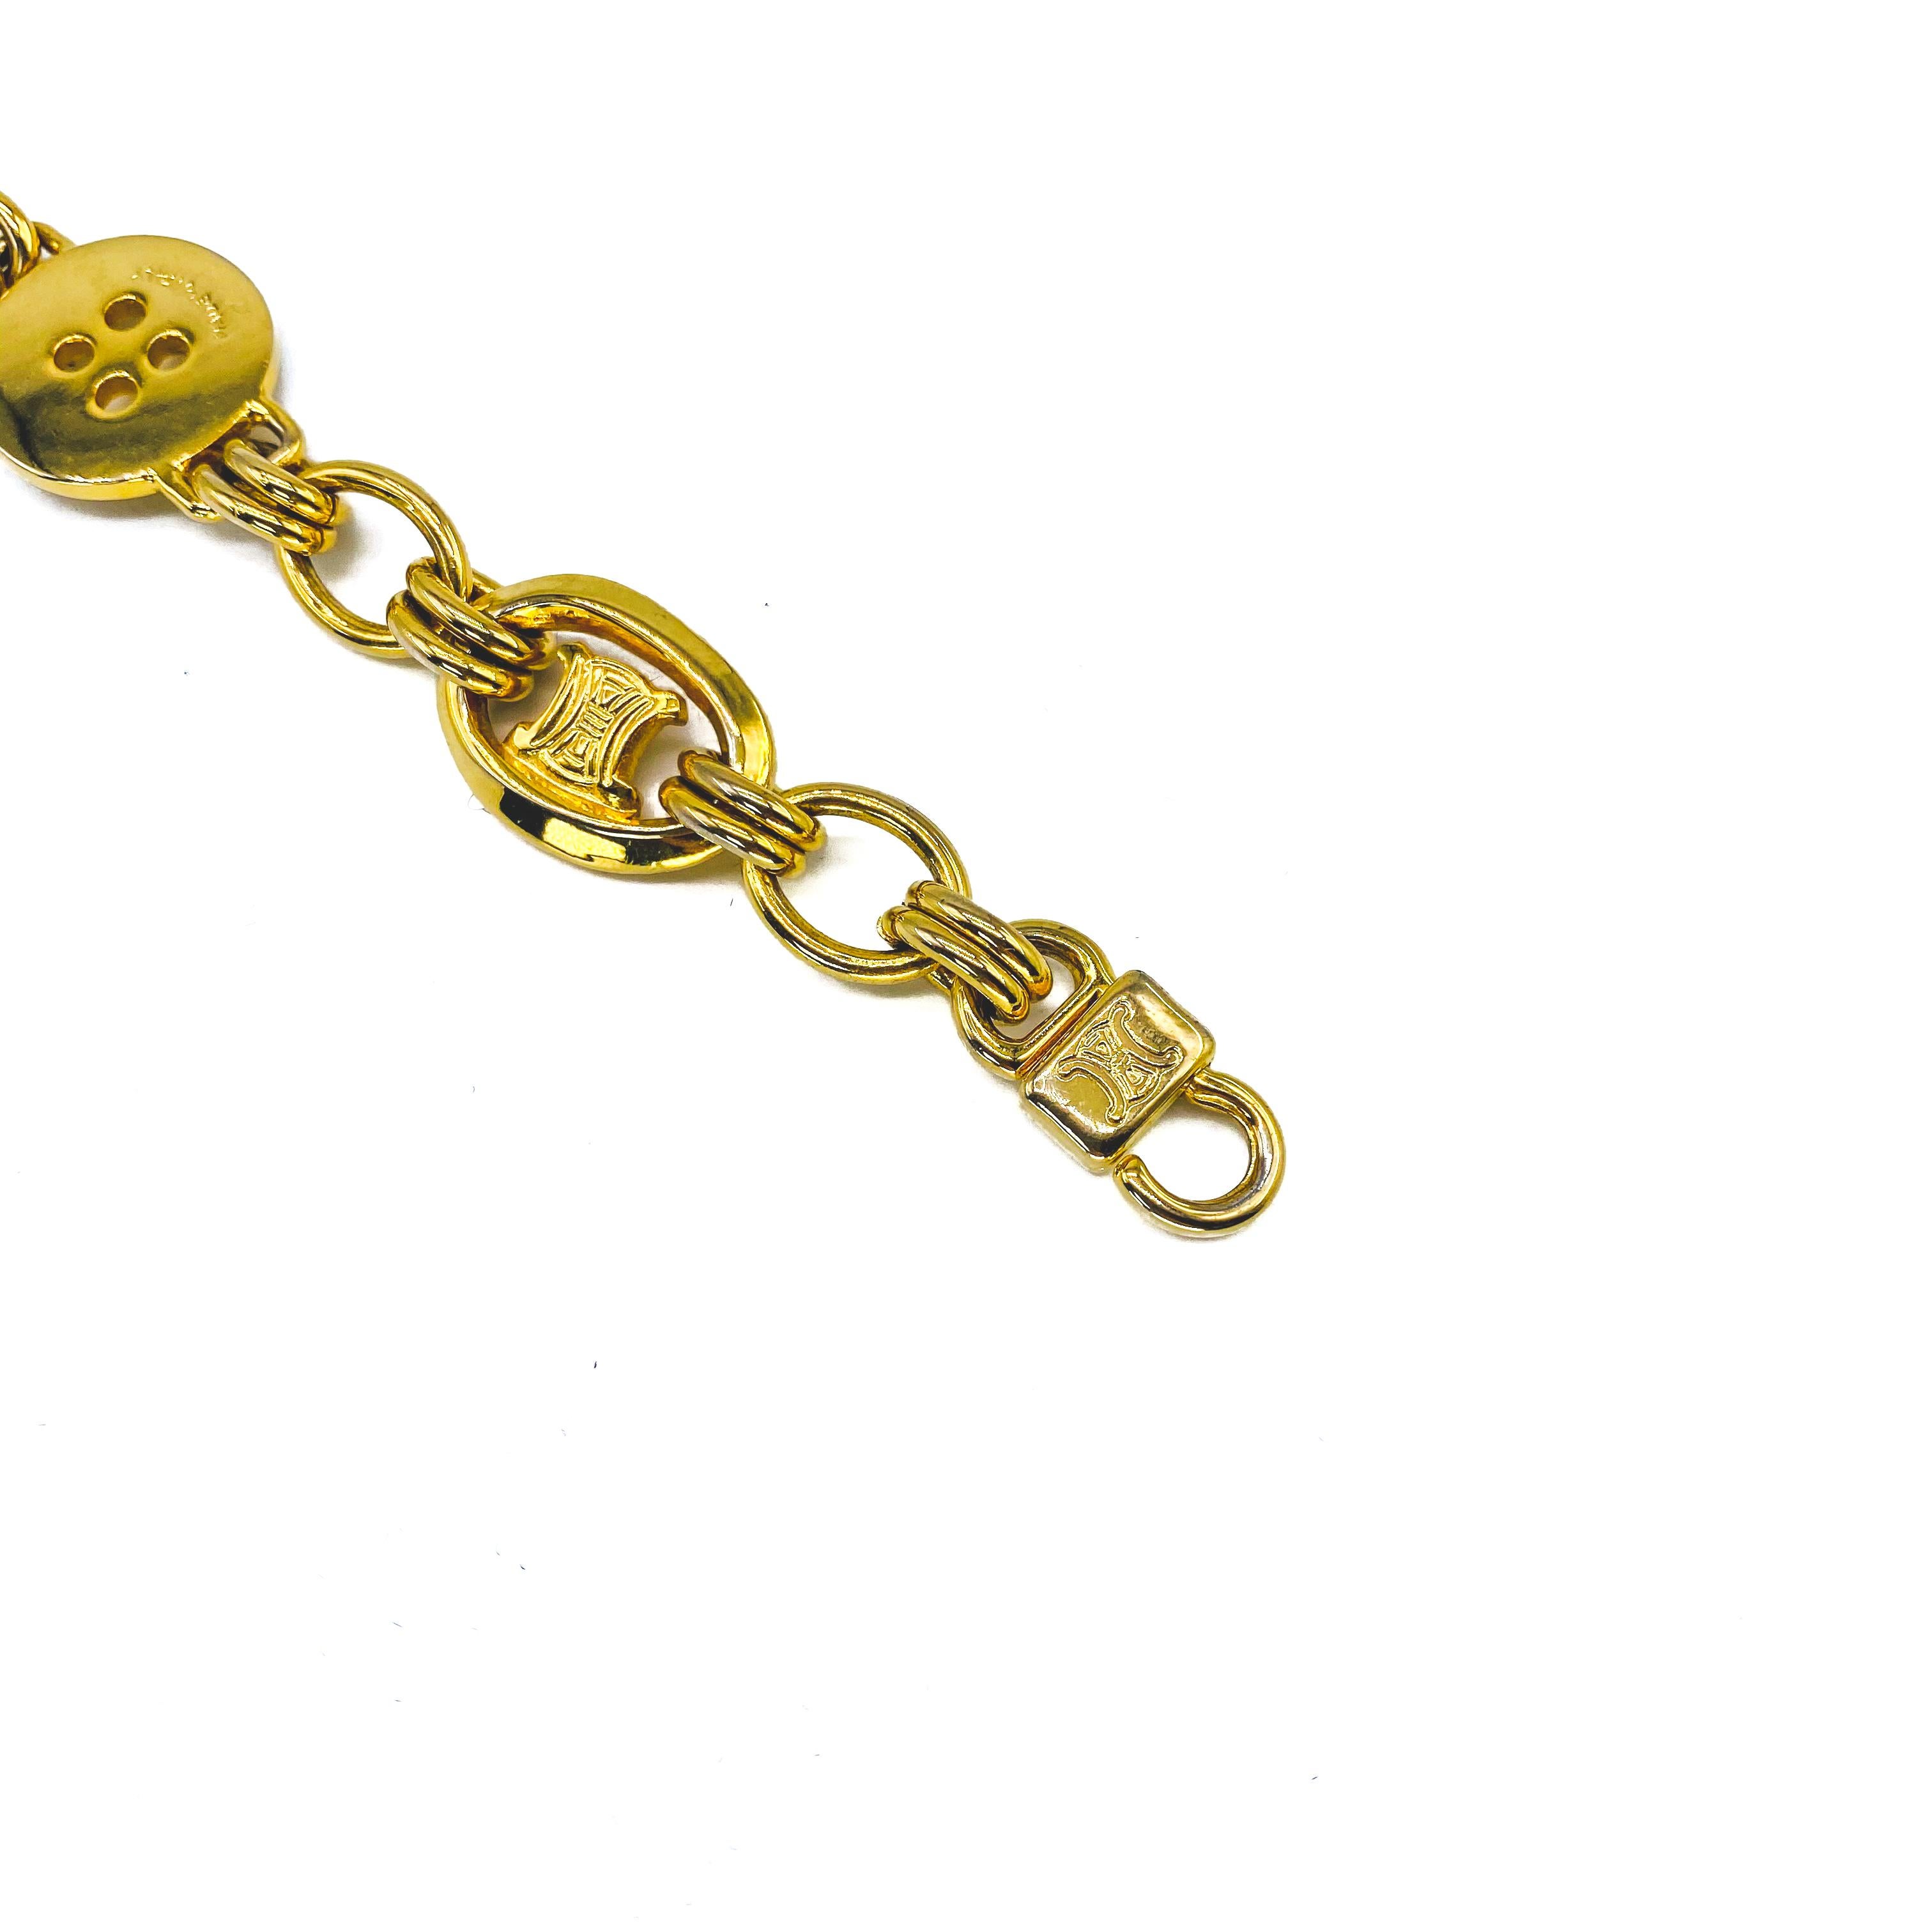 Celine Vintage 1990s Bracelet

Super versatile statement piece from the 90s Celine archive. The ultimate versatile piece. Throw on to elevate simple tees, sweatshirts and dresses. 

Detail
-Made in Italy in the 1990s
-Crafted from gold plated